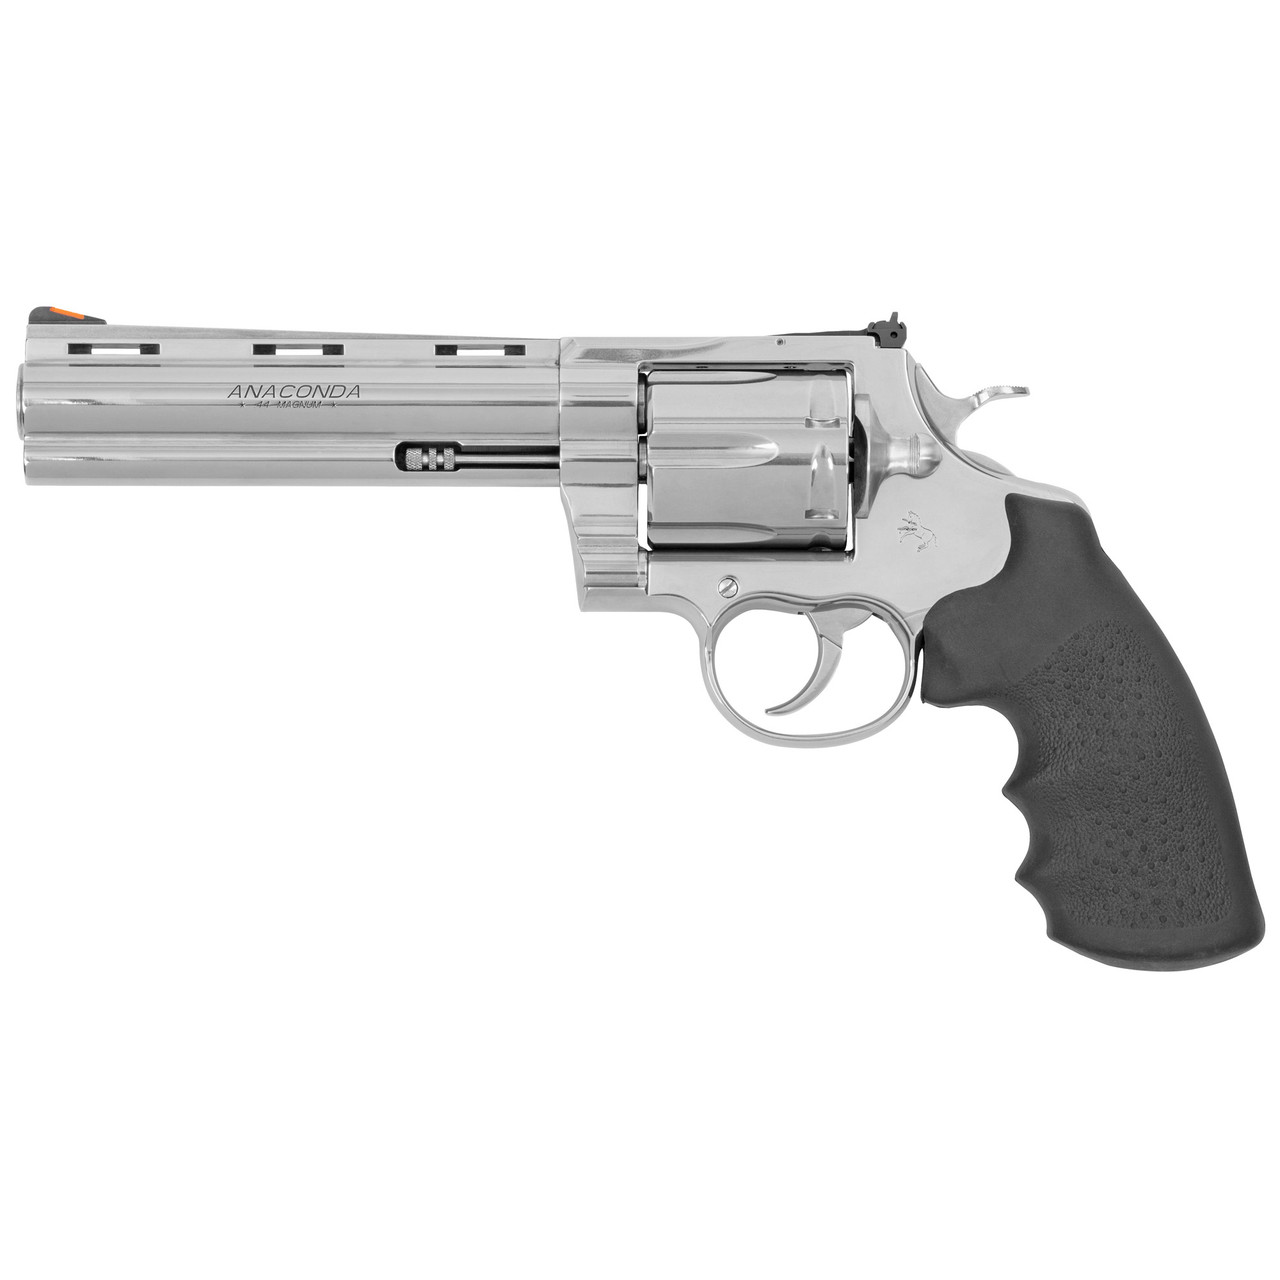 Image of Colt's Manufacturing, Anaconda, 44 Magnum, 6" Barrel, 6Rd, Semi-Bright Stainless Finish, Hogue Grip, Revolver